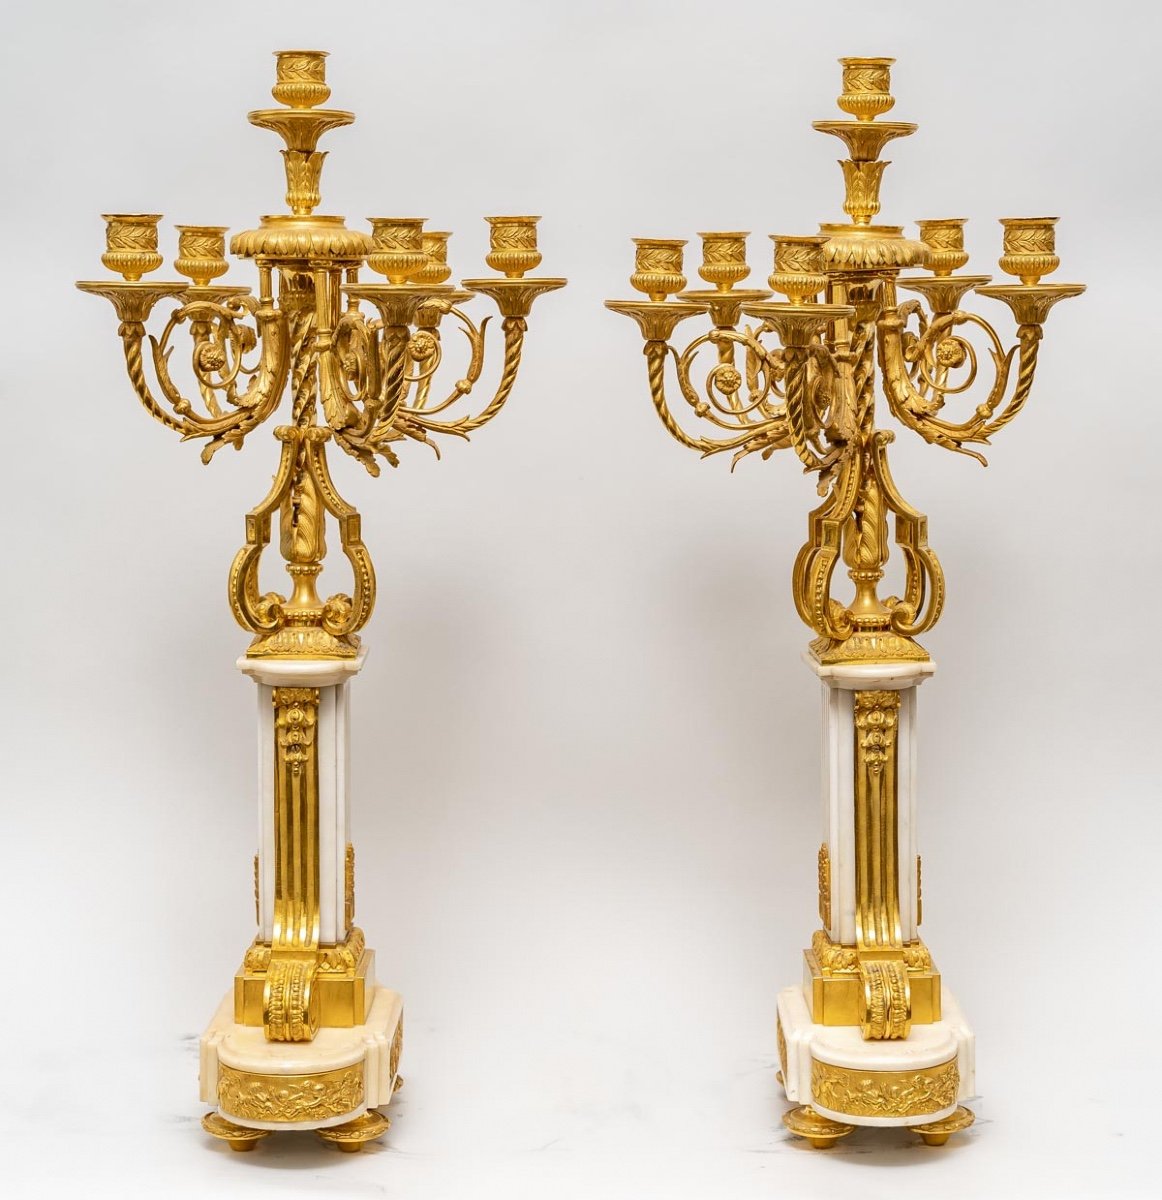 19th Century Garniture Comprising A Clock And A Pair Of Candelabra.-photo-4